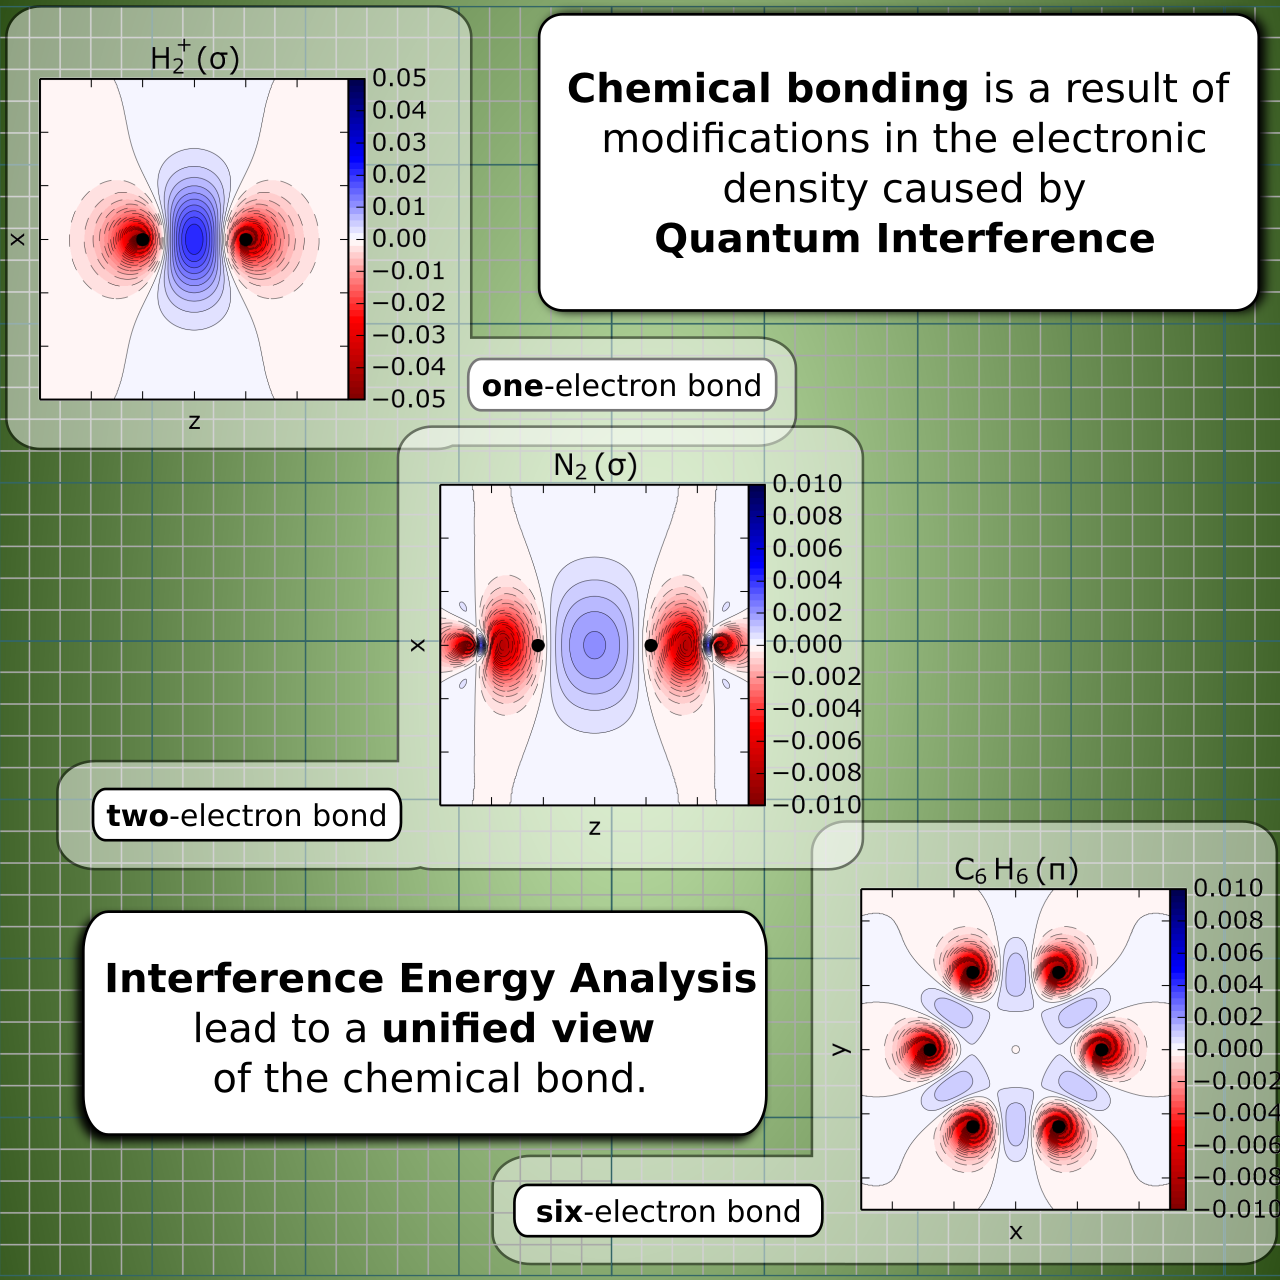 Chemical bonding is the result of modifications in the electronic density caused by Quantum Interference. Interference Energy Analysis leads to a unified view of the chemical bond.